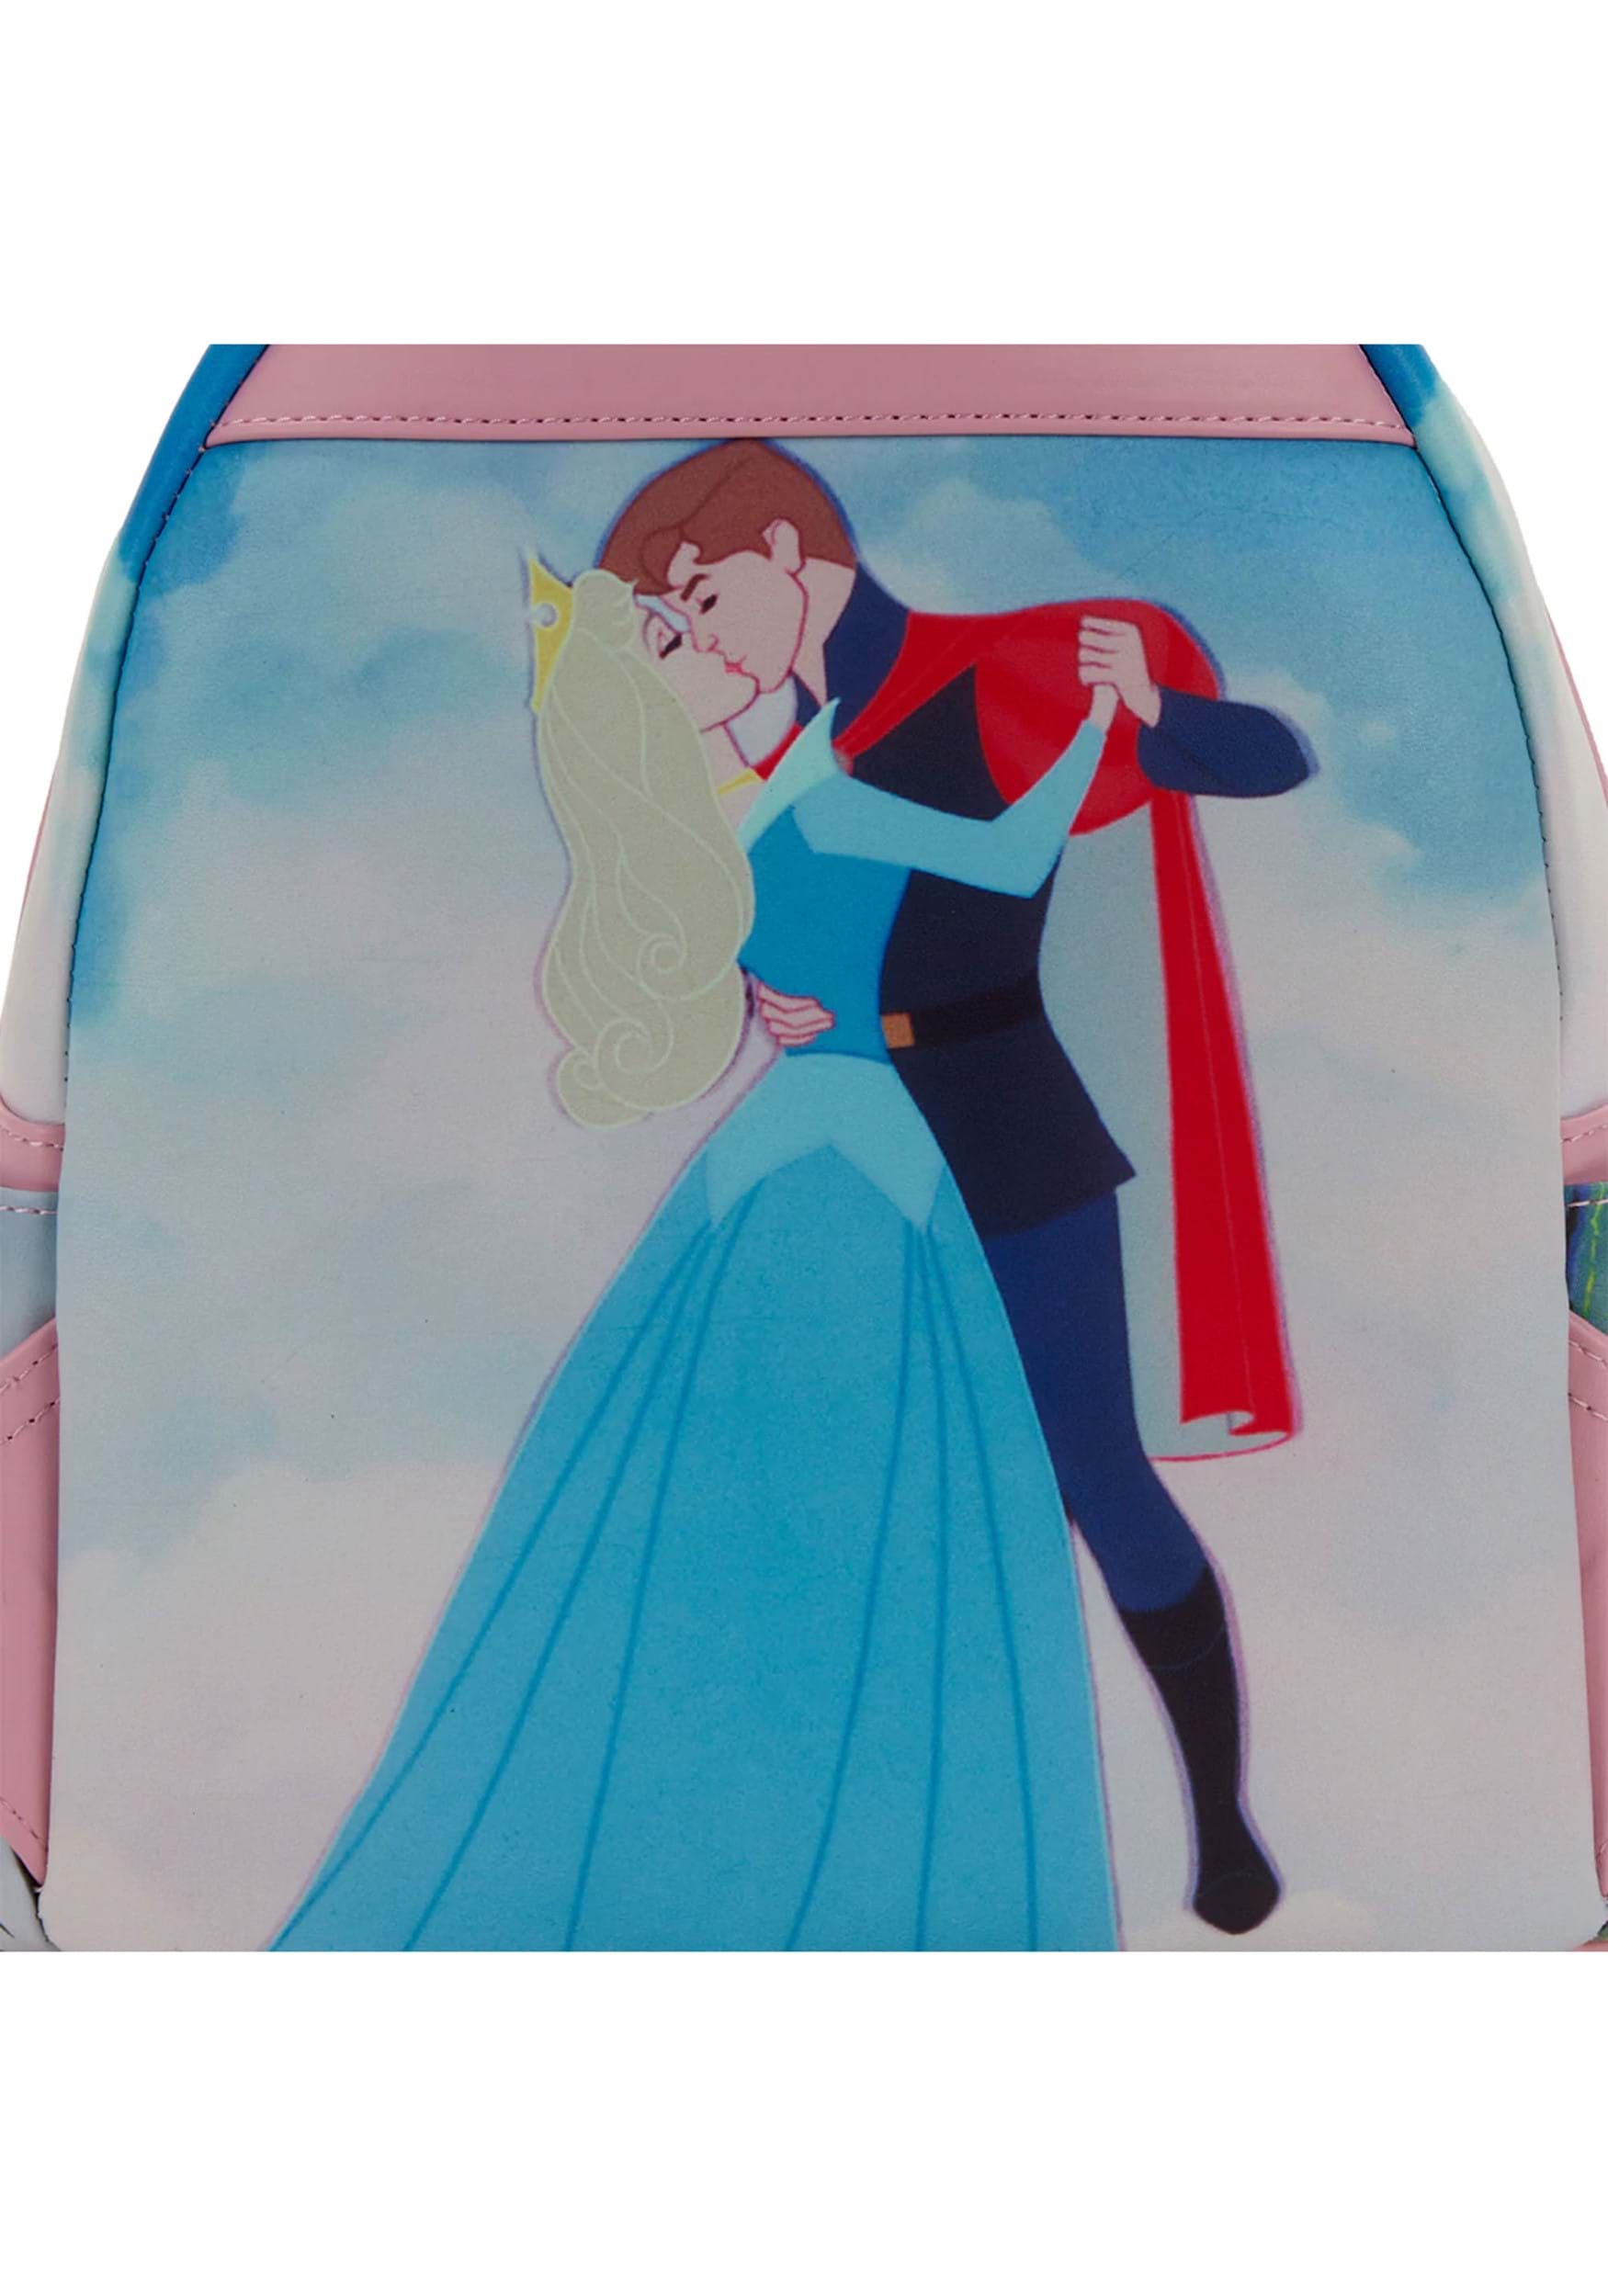 Loungefly Sleeping Beauty Aurora Print Bag - Gallery of Art & Collectibles